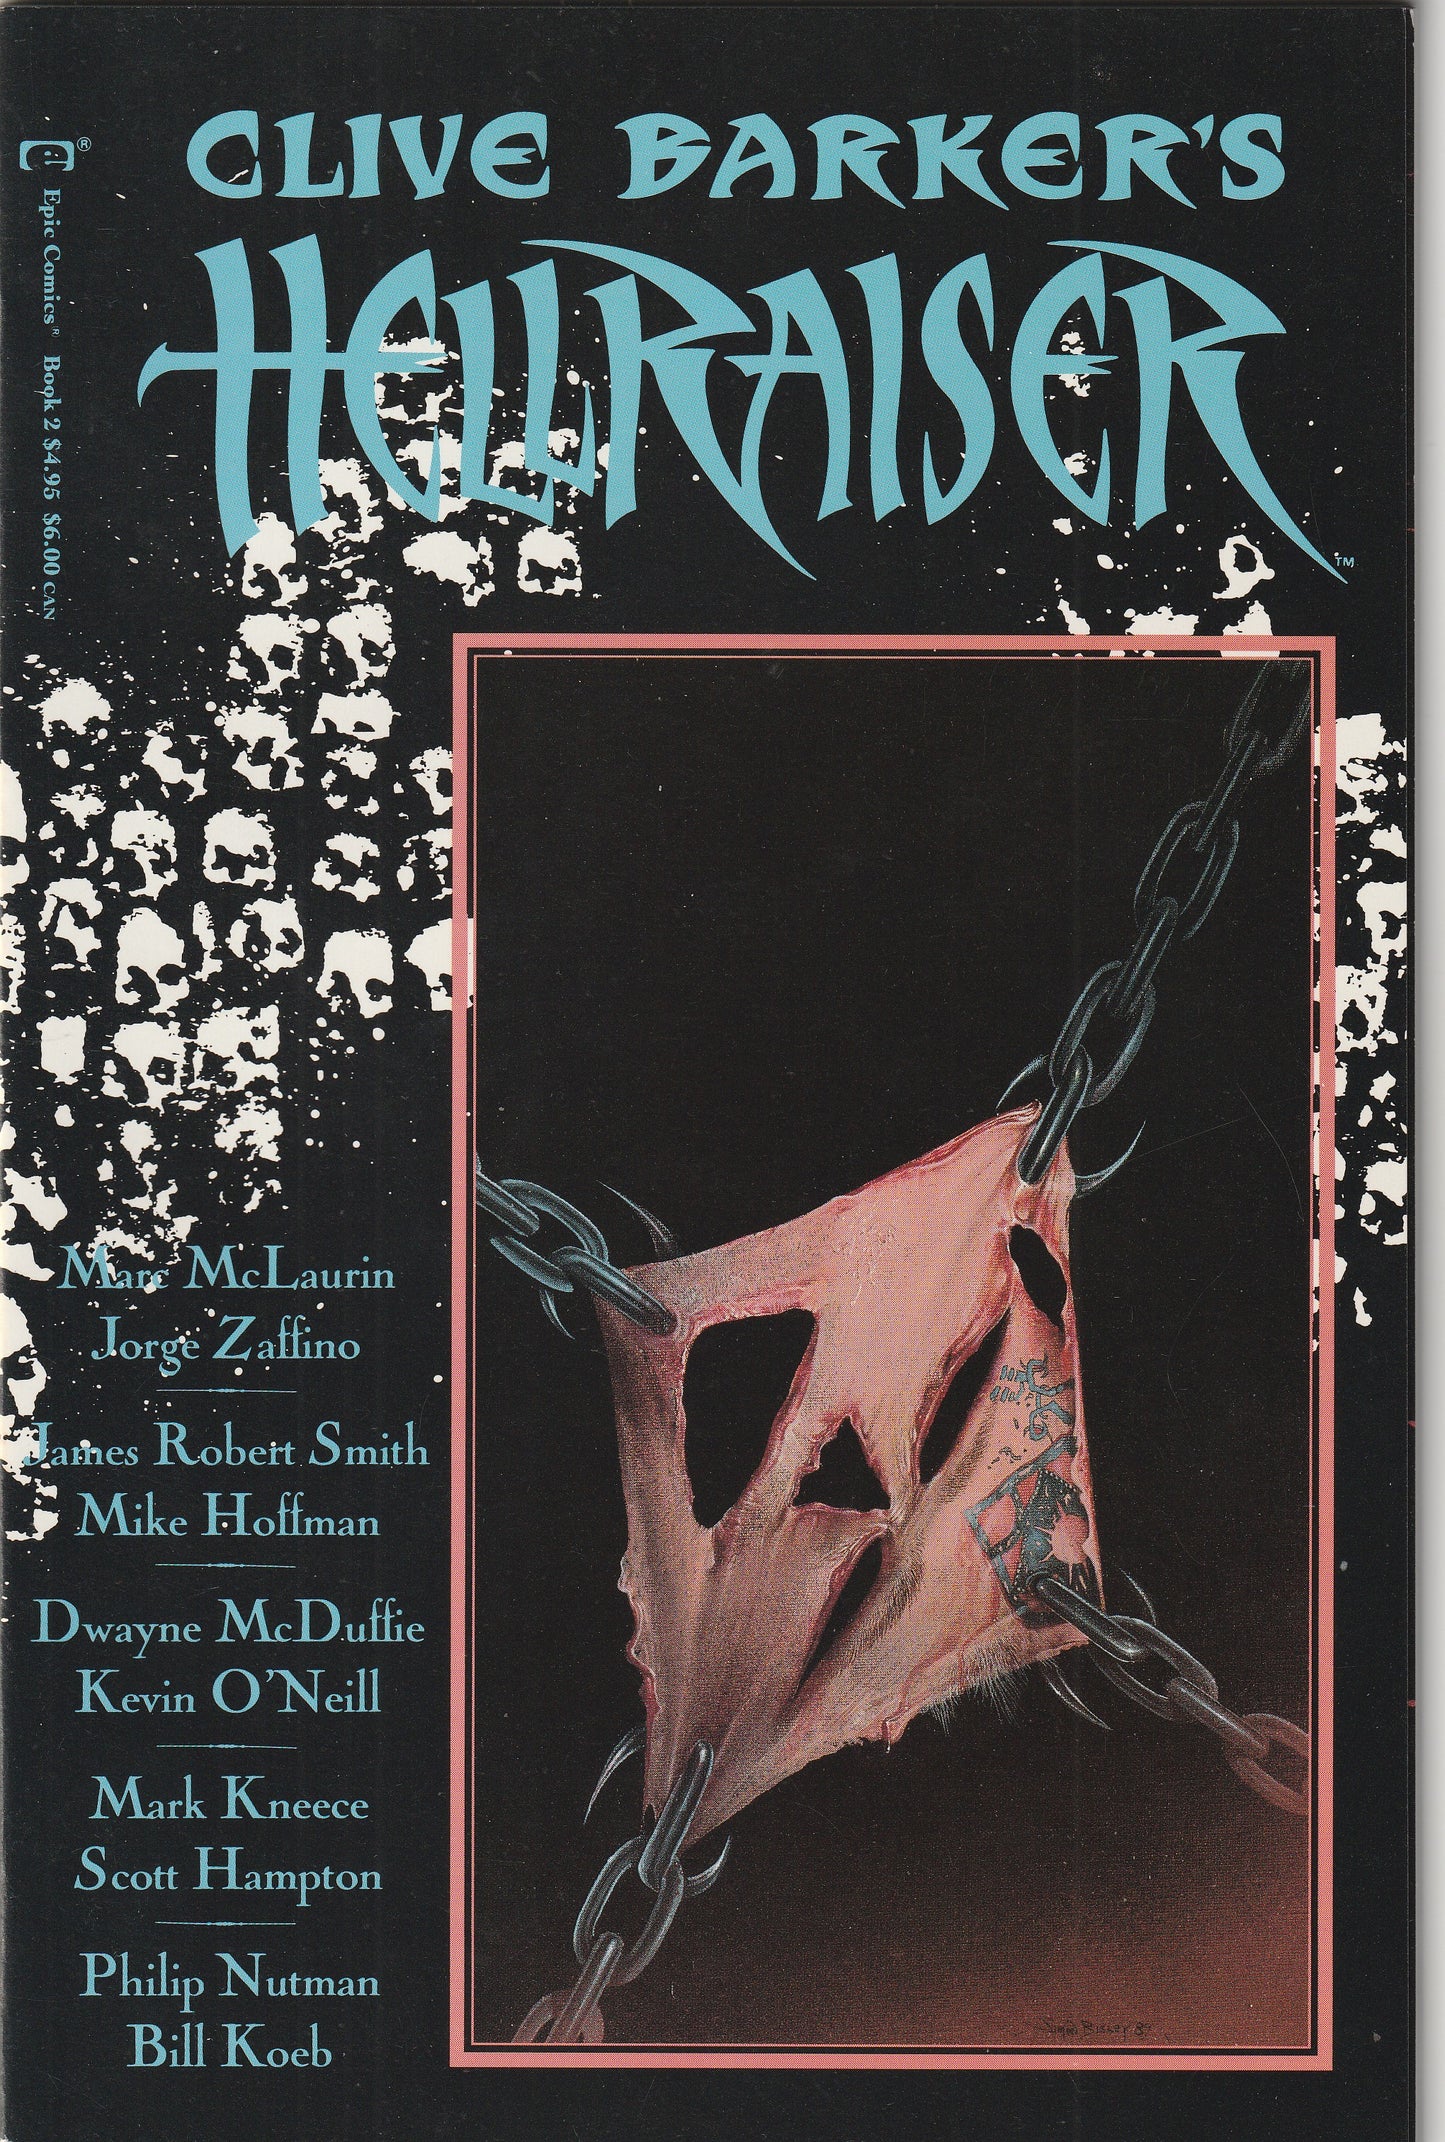 Clive Barker's Hellraiser #2 (1990) - 1st interior appearance of Pinhead